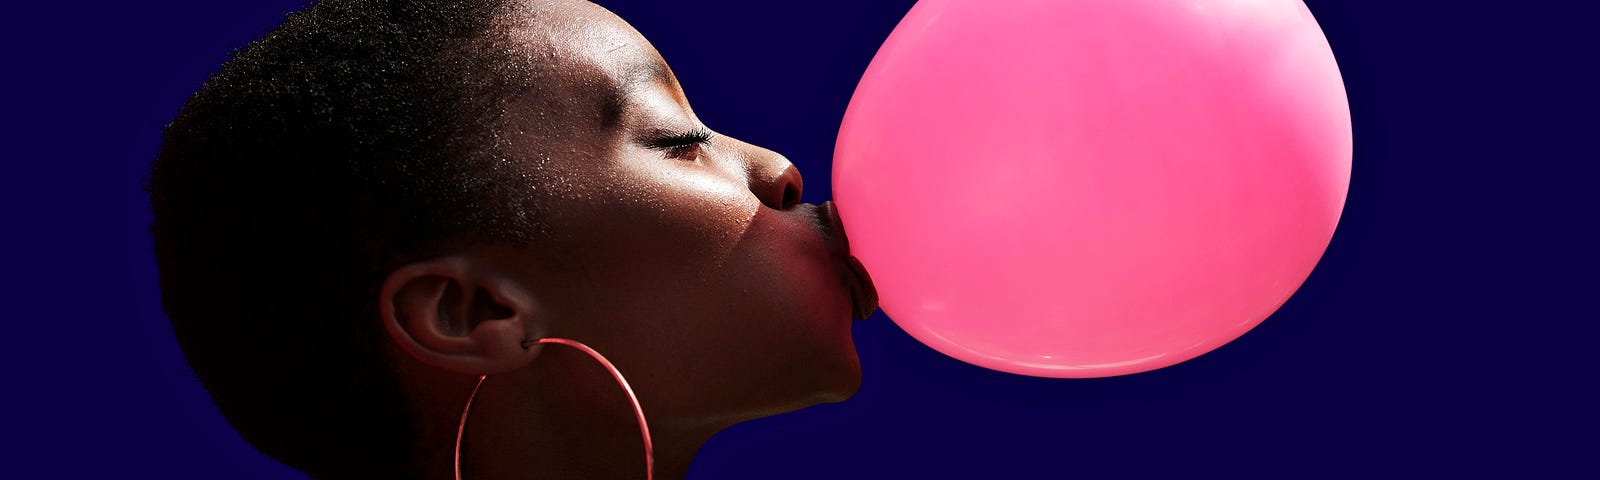 A photo of a young black woman wearing hoop earrings blowing a bubble with bubblegum.